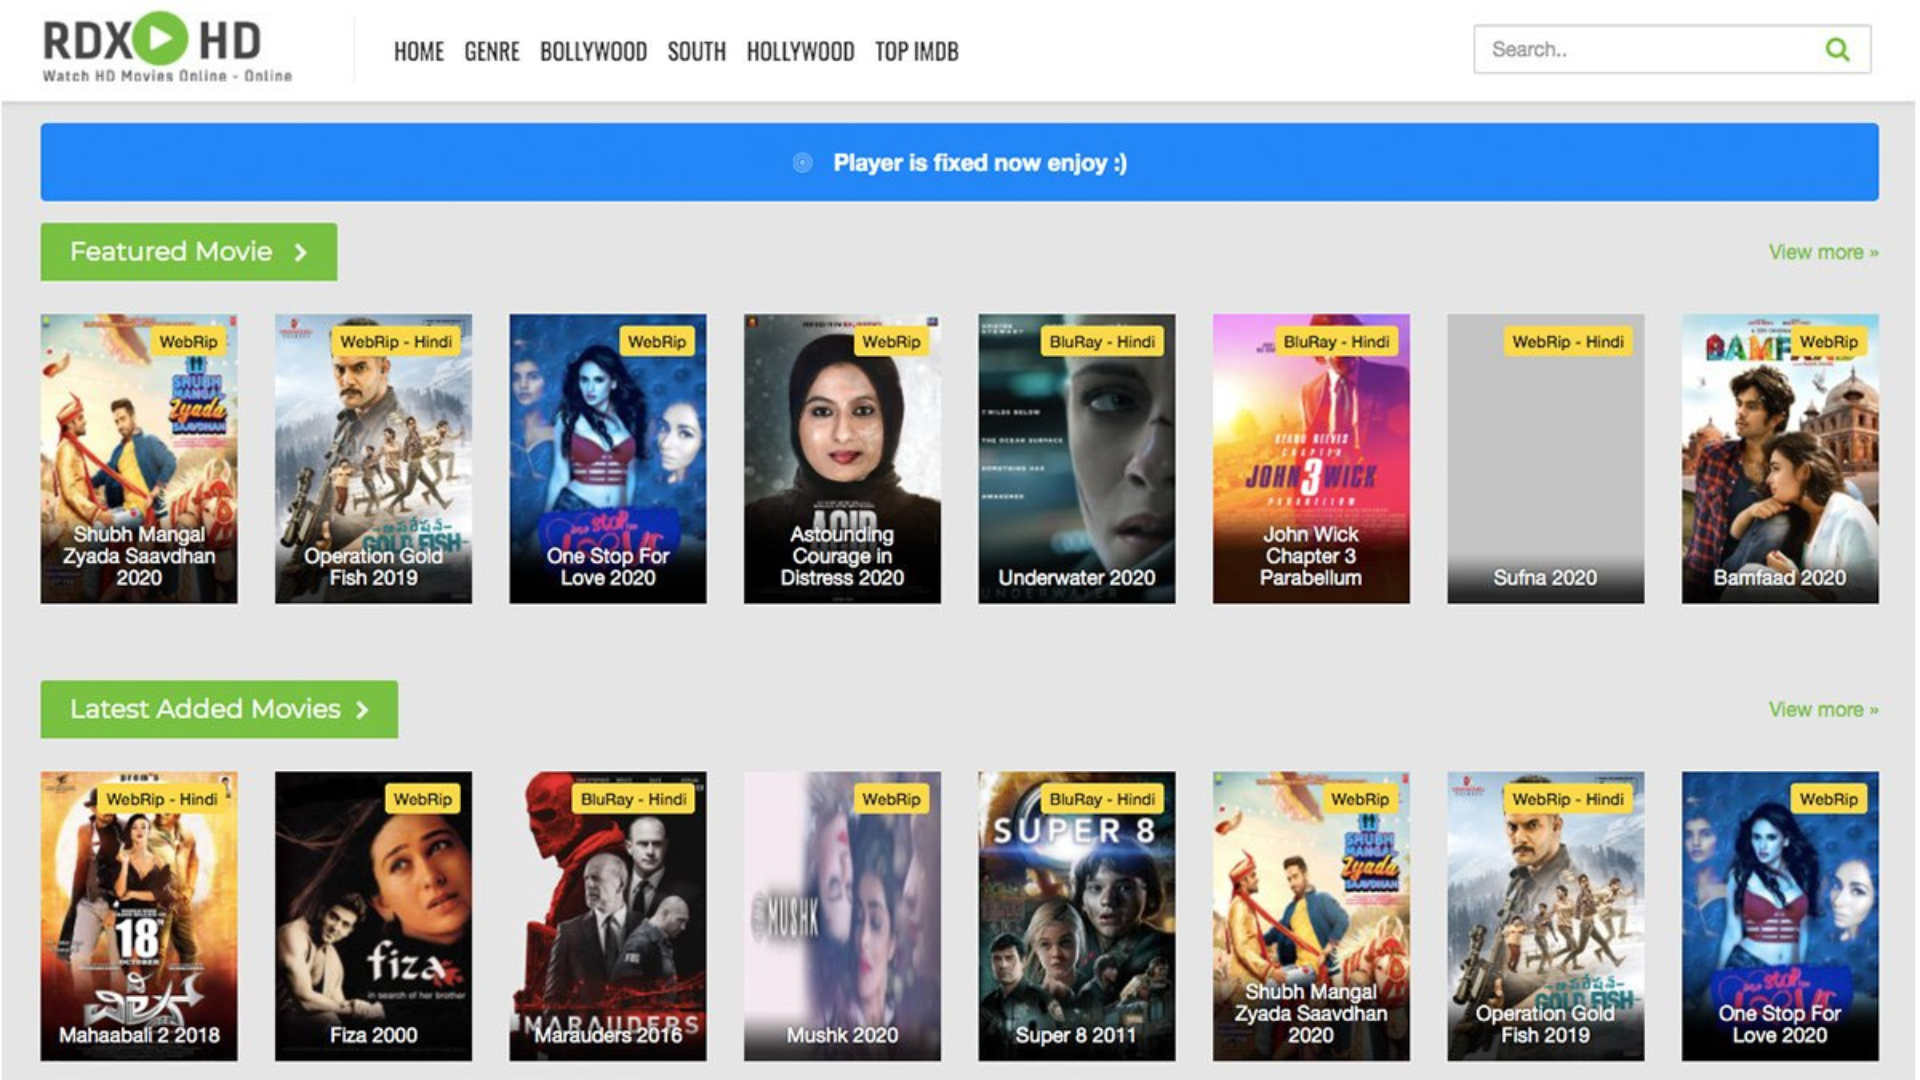 Rdxhd.net webpage with various movie covers with search button on the upper left